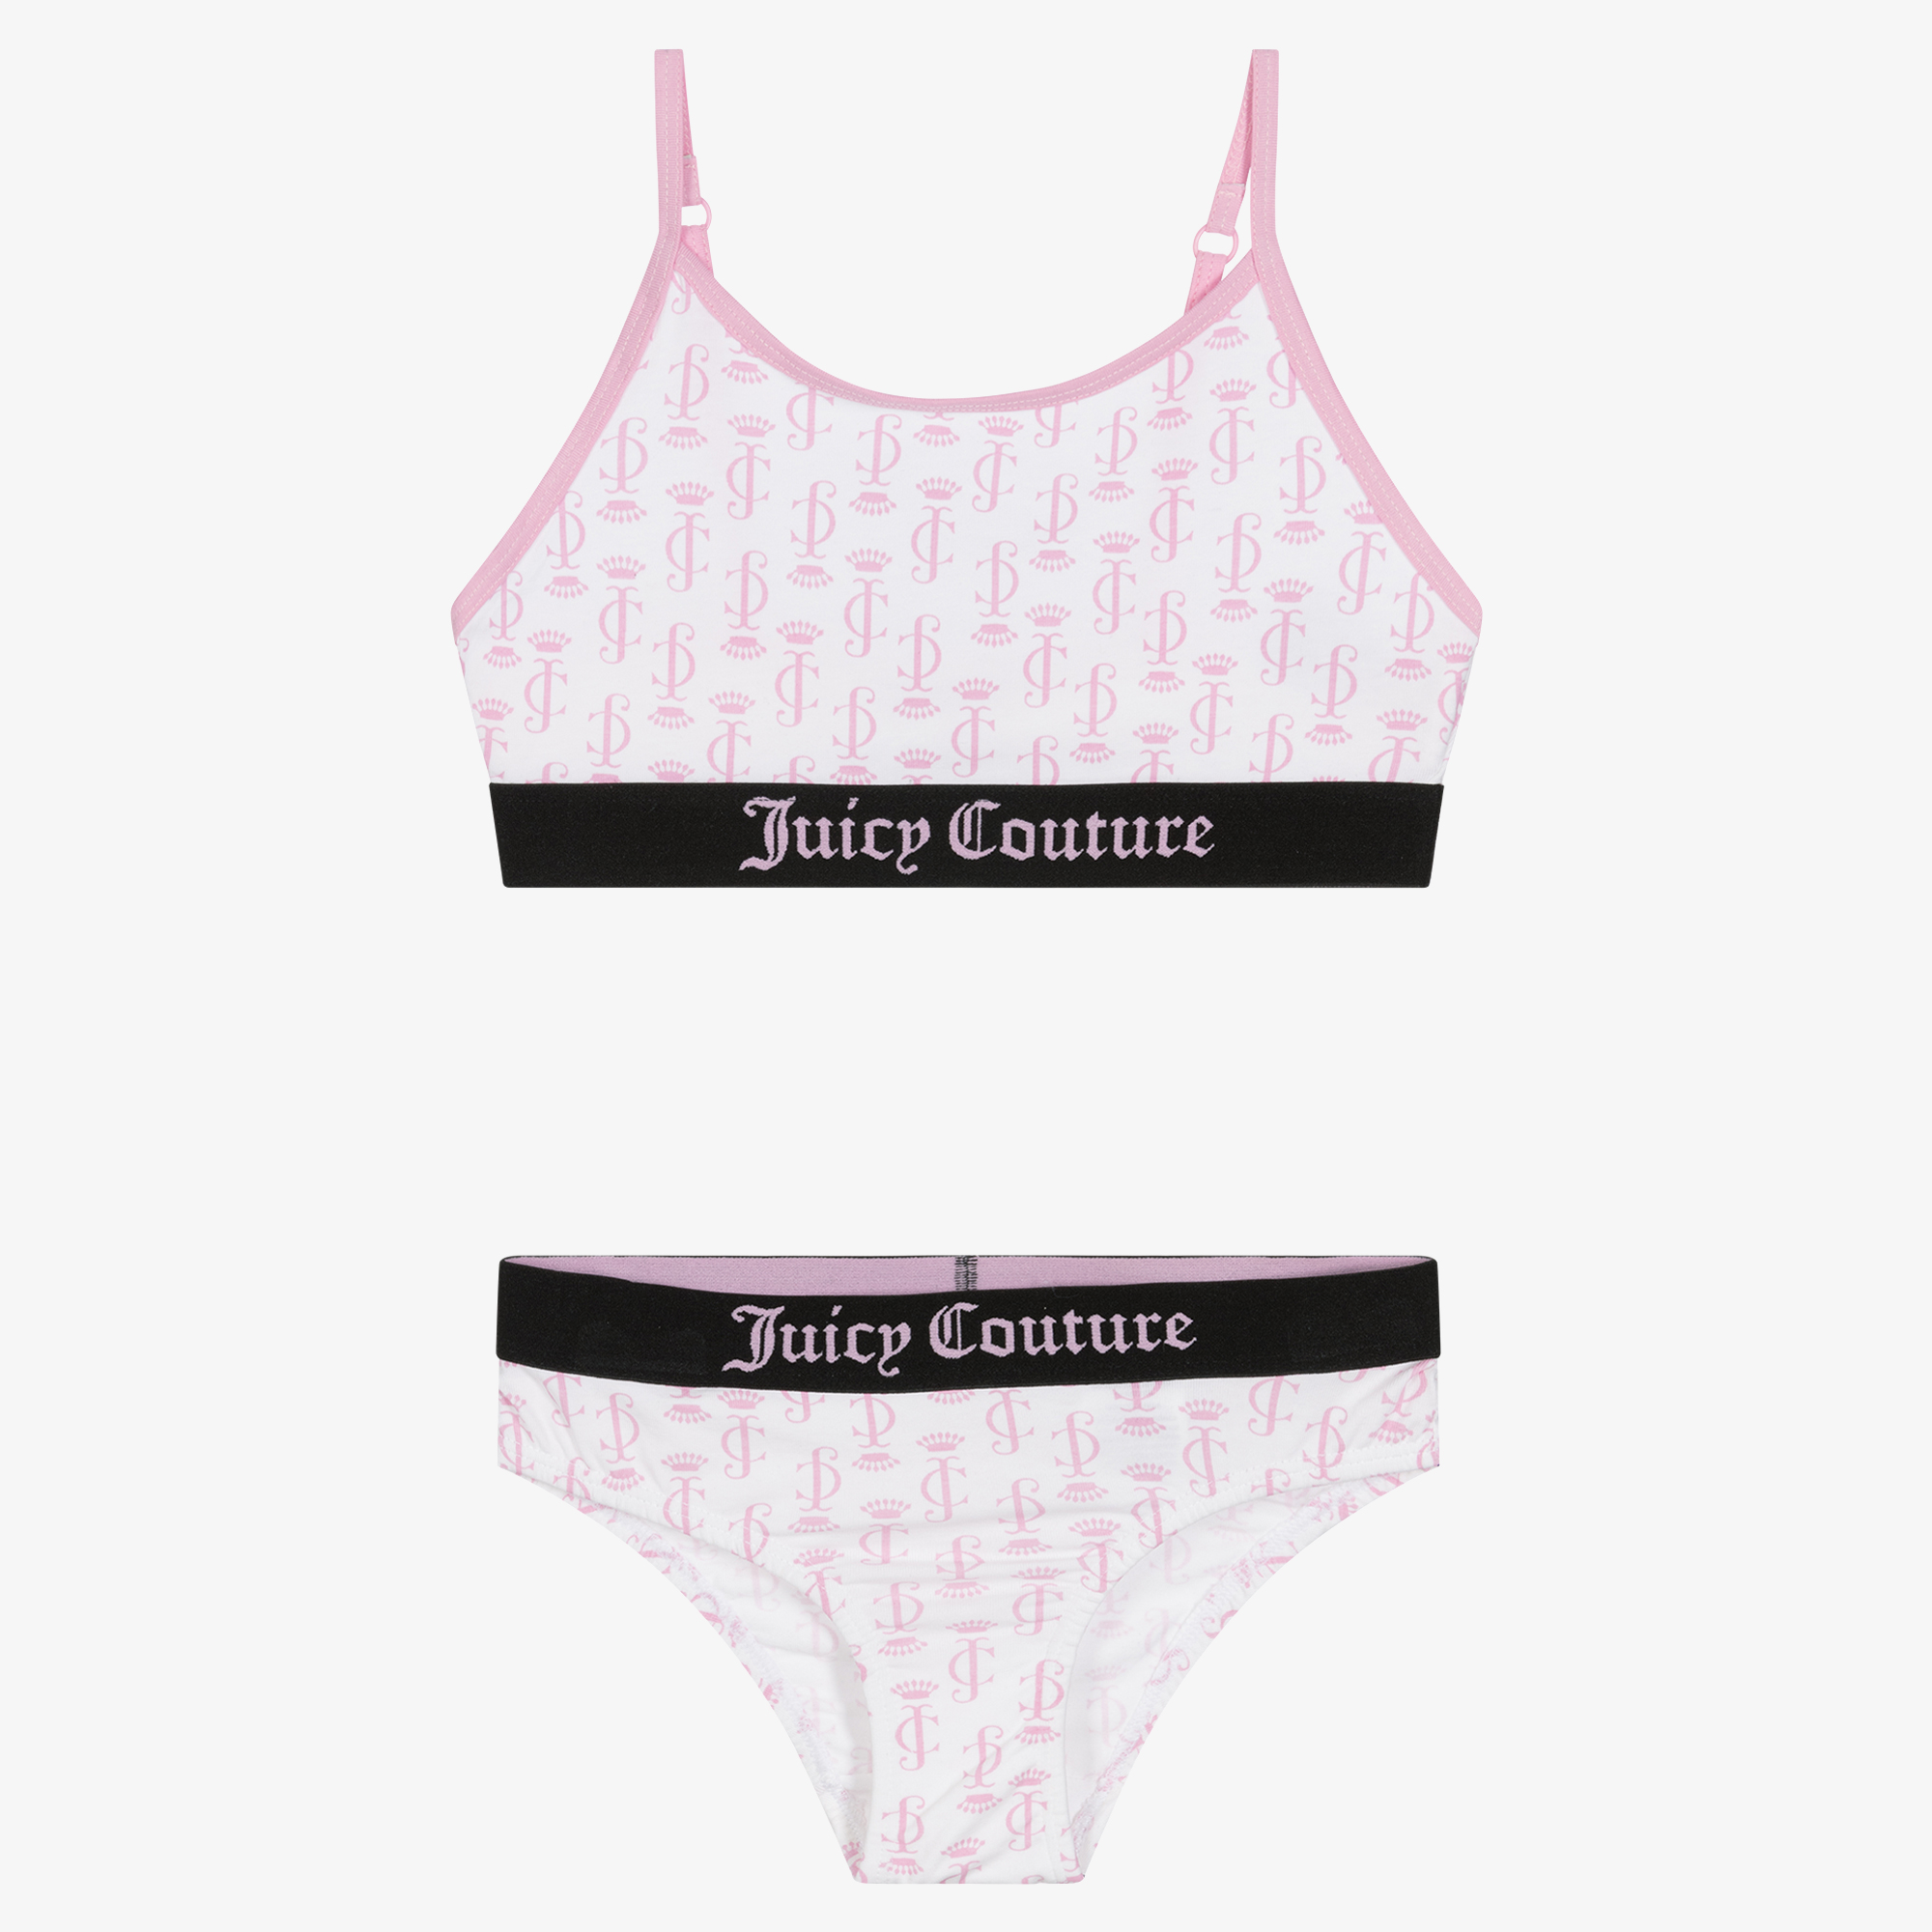 Juicy Couture Girls White Bra Top & Knickers Set